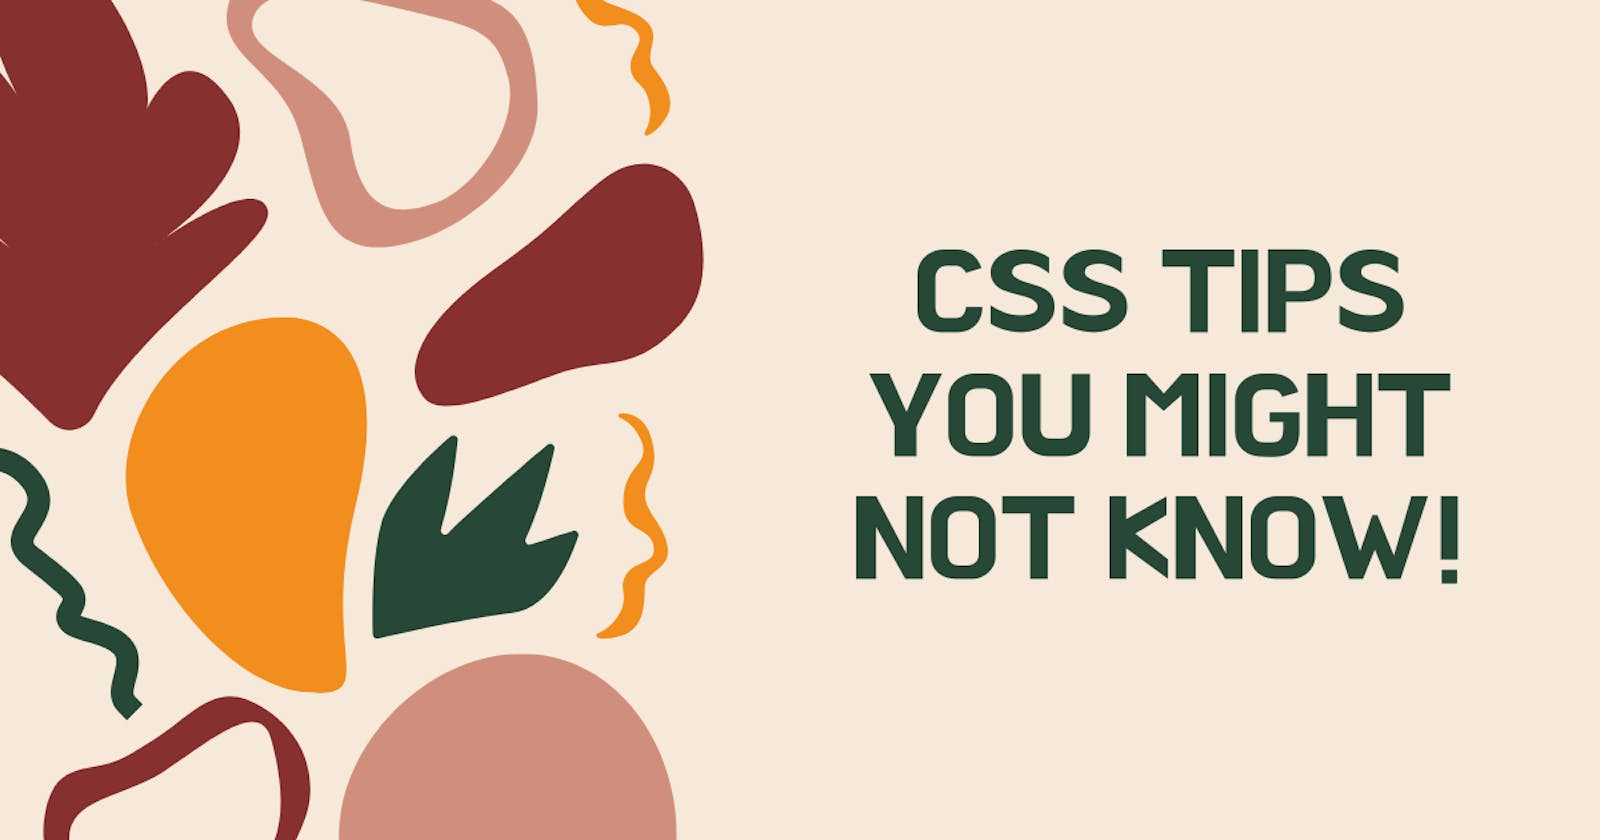 CSS PRO TIPS you might not know!